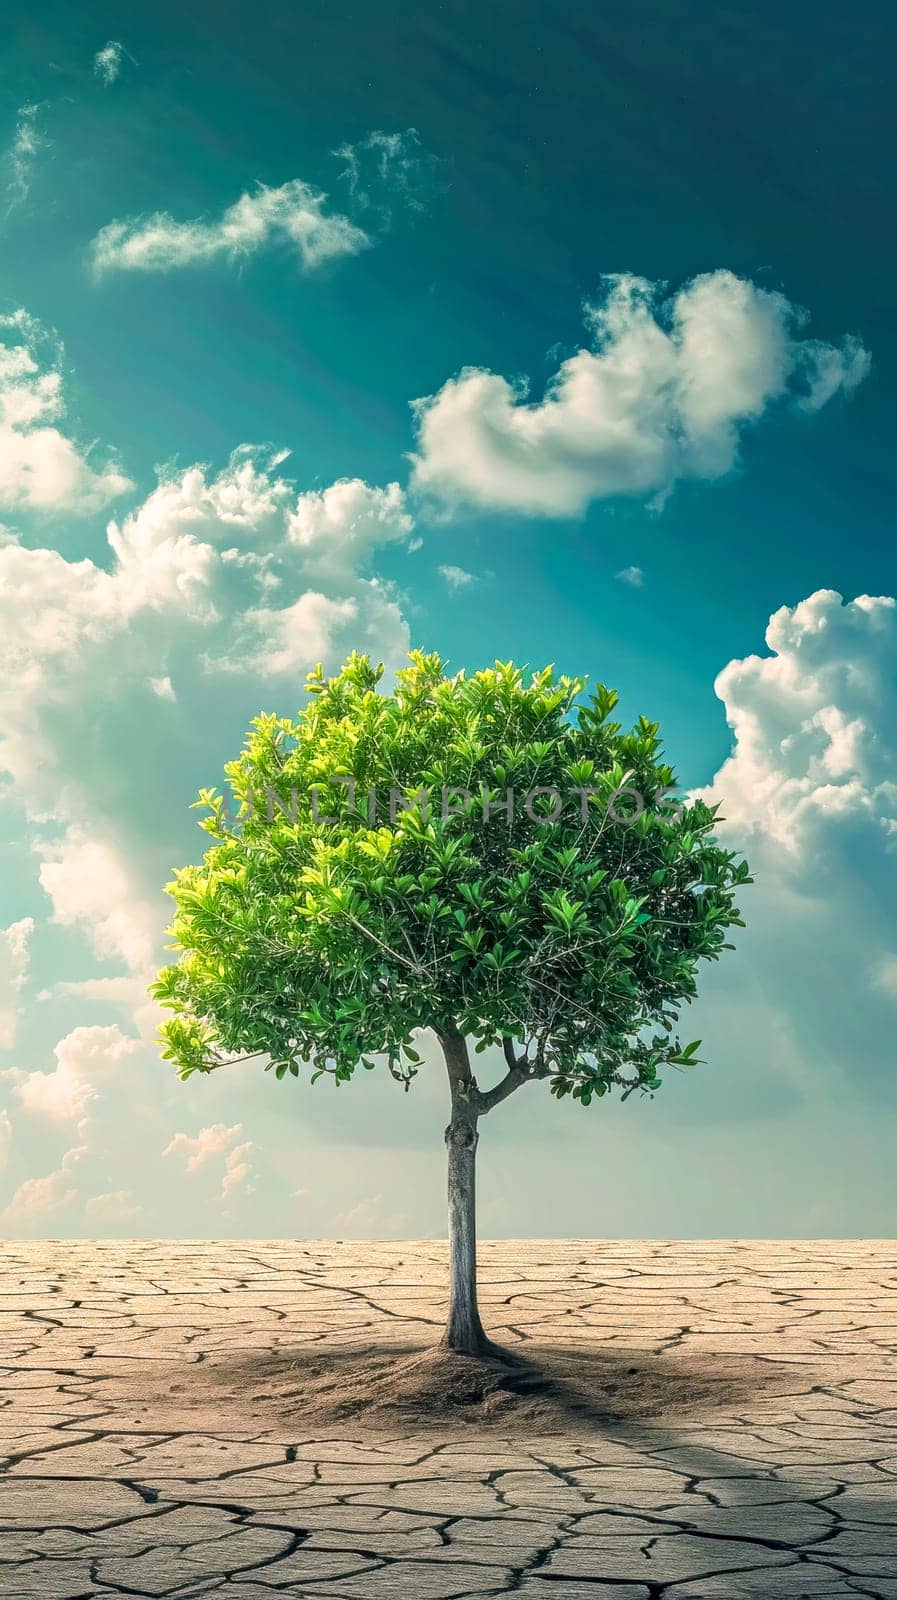 A single green tree thriving on cracked dry land under a clear blue sky with fluffy clouds. by Edophoto